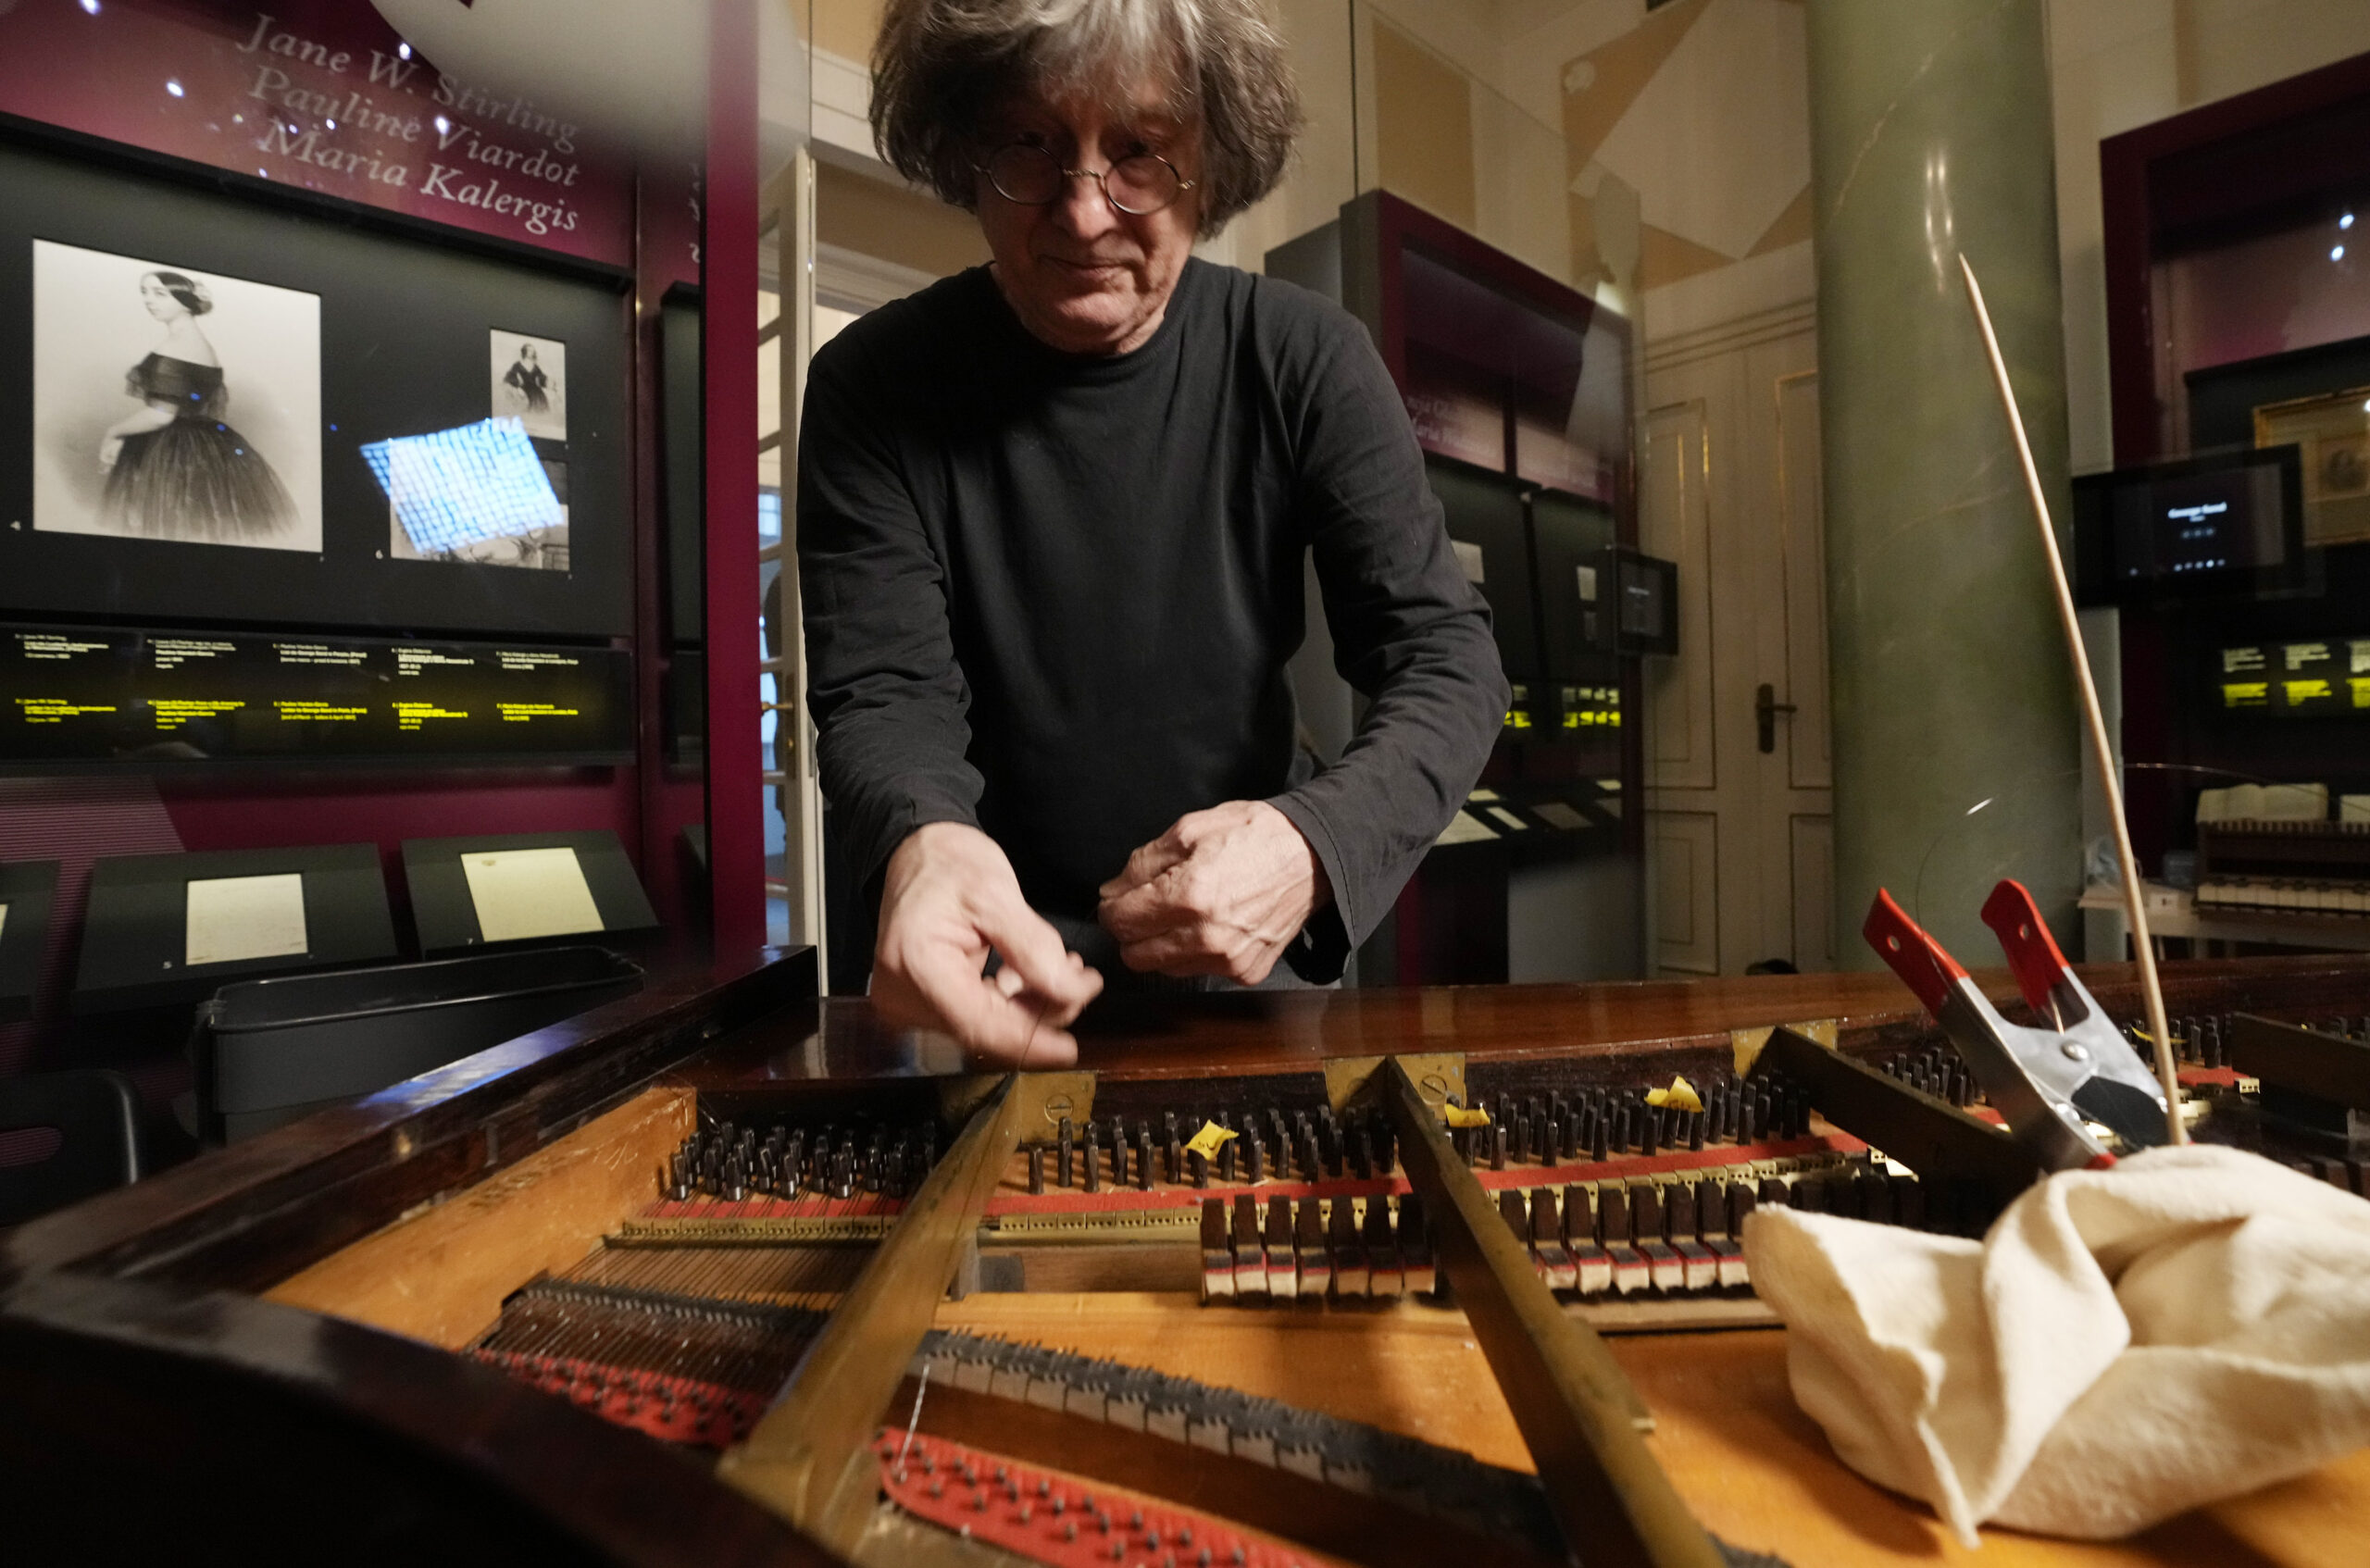 Texas-born expert on historic pianos, Paul McNulty, renovates the last piano that Frederic Chopin played and composed on, at the Chopin museum in Warsaw, Poland, on Thursday, Dec. 9, 2021. The 1848 Pleyel piano was offered to Chopin's family after his 1849 death by Scottish pianist Jane Stirling, and survived two world wars in Warsaw, but had modern strings put in in the mid-20th century, that destroyed the tone. McNulty aims at bringing it back to its original characteristics. (AP Photo/Czarek Sokolowski)